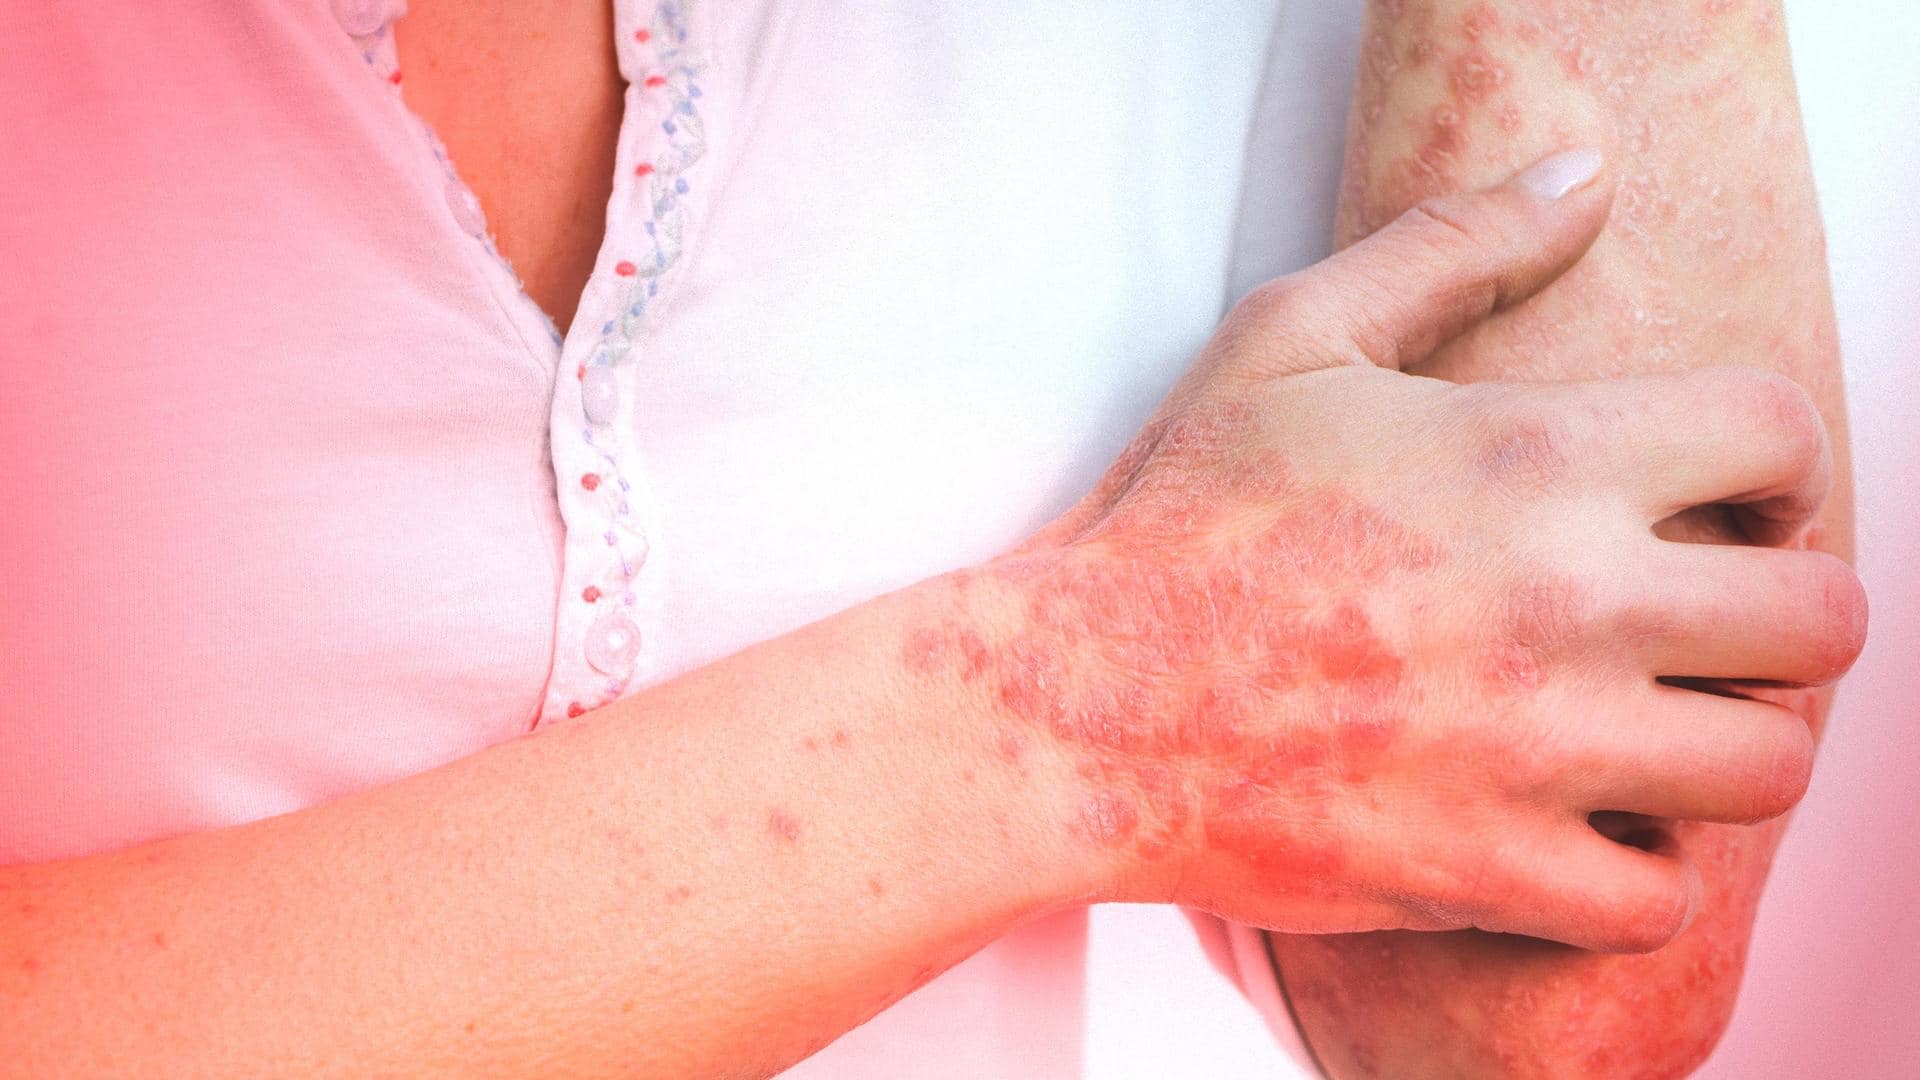 Psoriasis: From symptoms to treatment, here's everything you should know